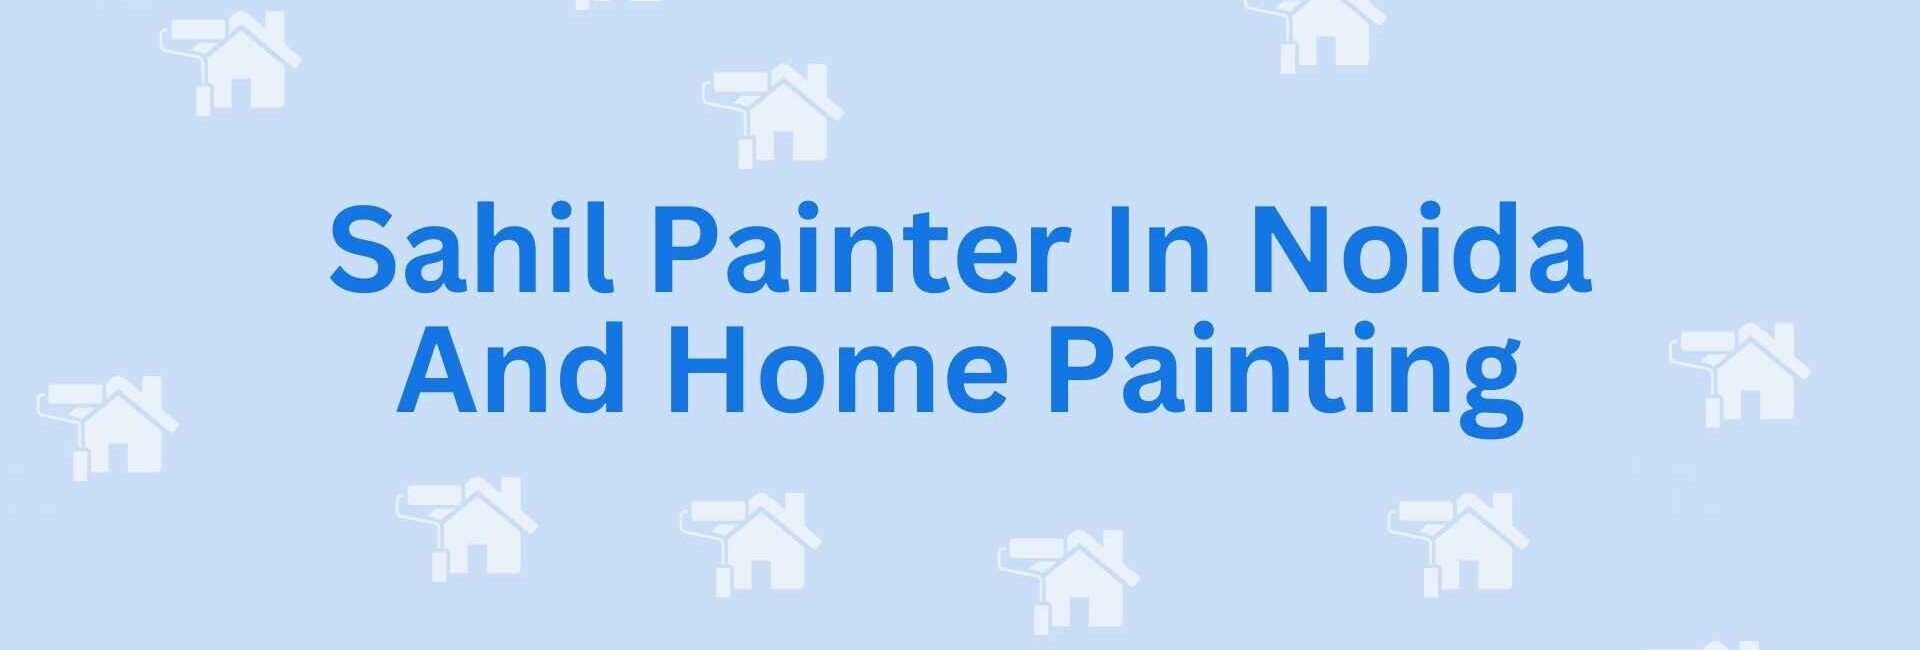 Sahil Painter In Noida And Home Painting - painting services in Noida